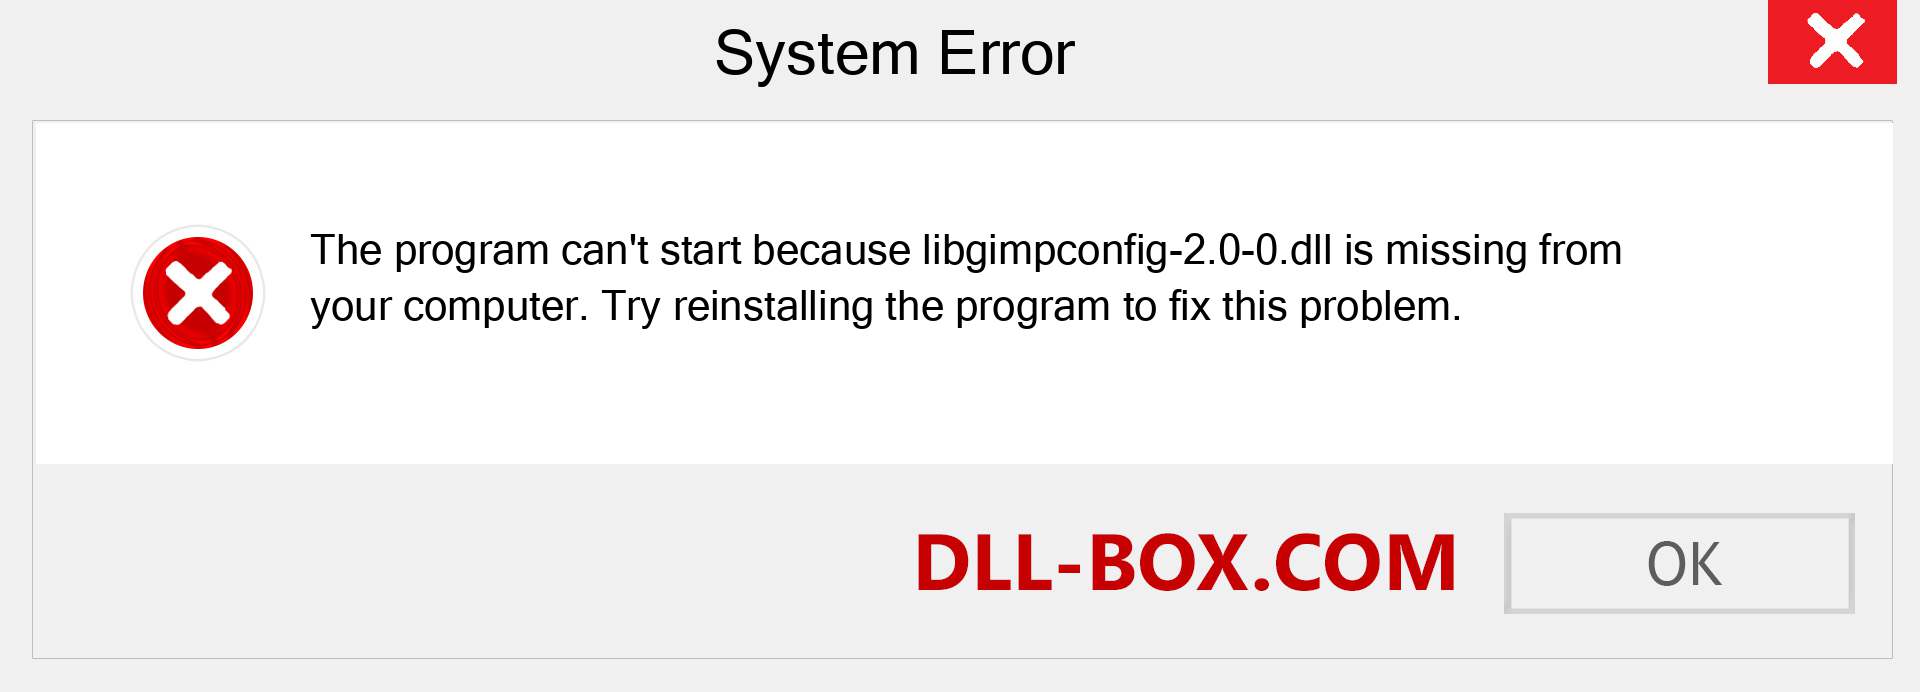  libgimpconfig-2.0-0.dll file is missing?. Download for Windows 7, 8, 10 - Fix  libgimpconfig-2.0-0 dll Missing Error on Windows, photos, images